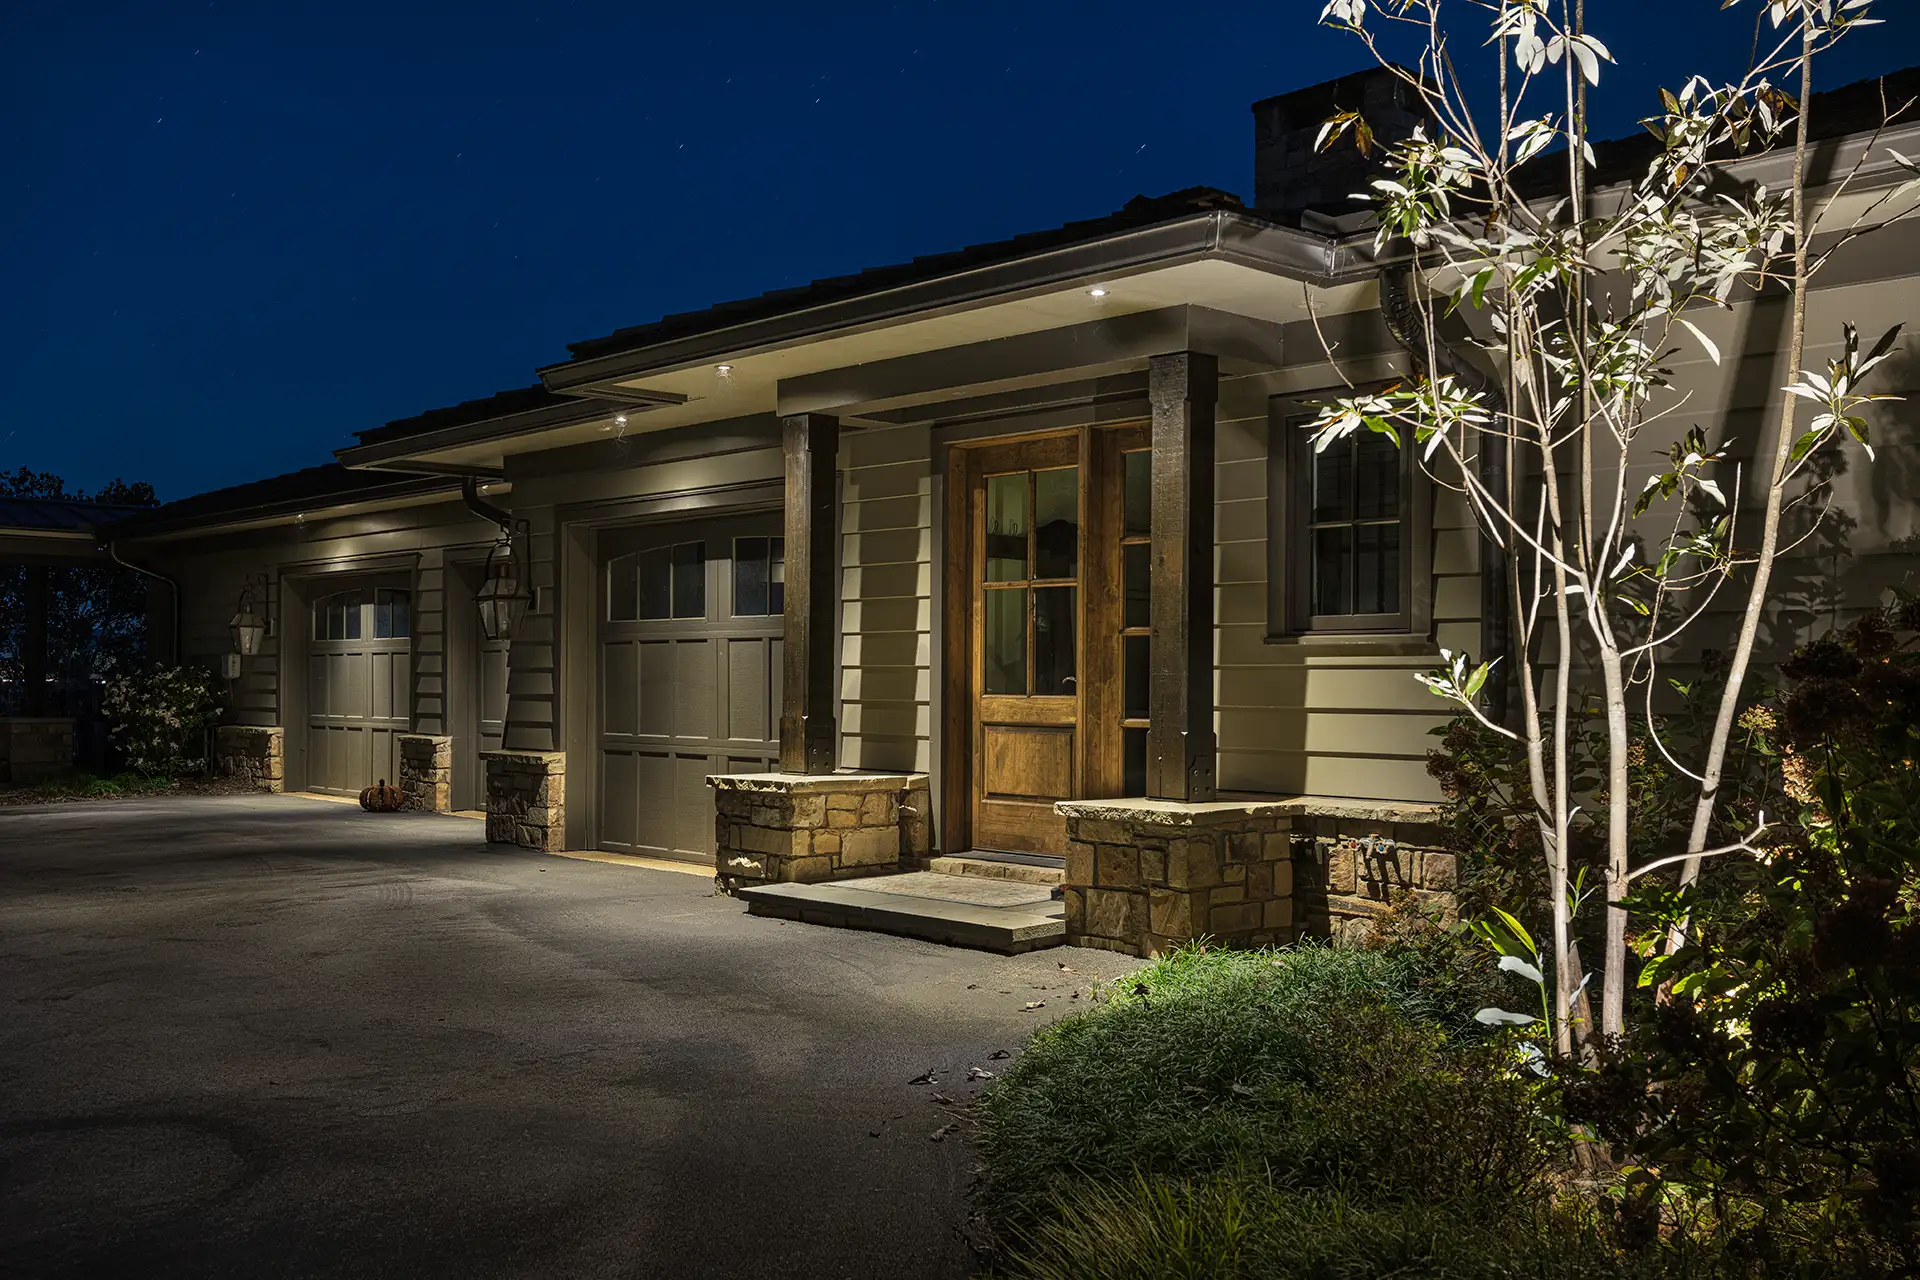 Flicker Ct image 4 garage side entry Lighthouse Outdoor Lighting and Audio Knoxville TN